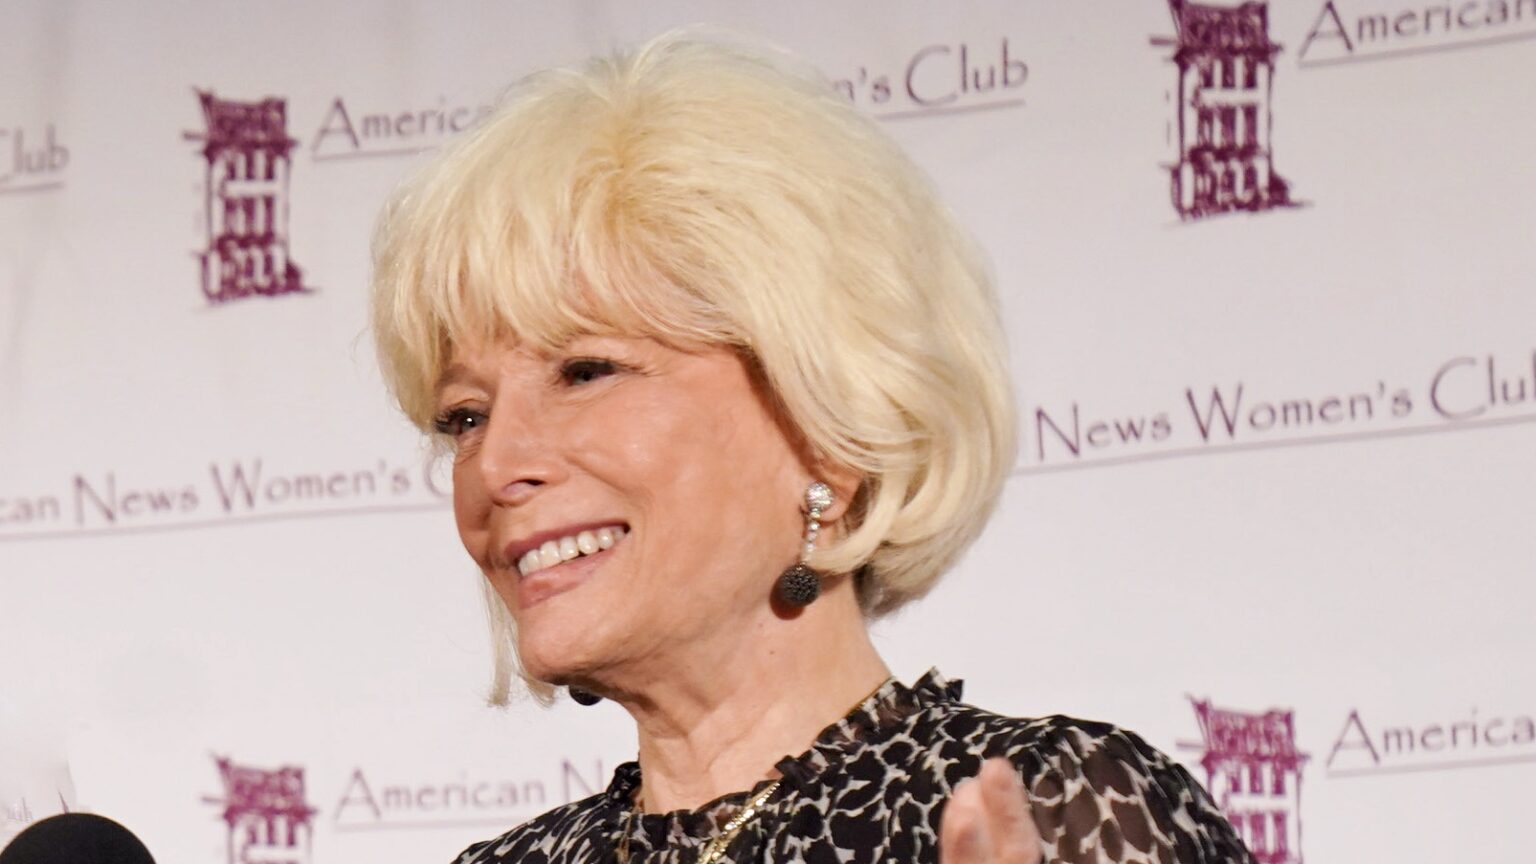 Lesley Stahl glimmered on stage at the National Press Club as recipient of the ANWC's Excellence in Journalism award while she took a jab at some of her legendary colleagues to help raise funds for journalism scholarships. (Patricia McDougall/American News Women's Club)